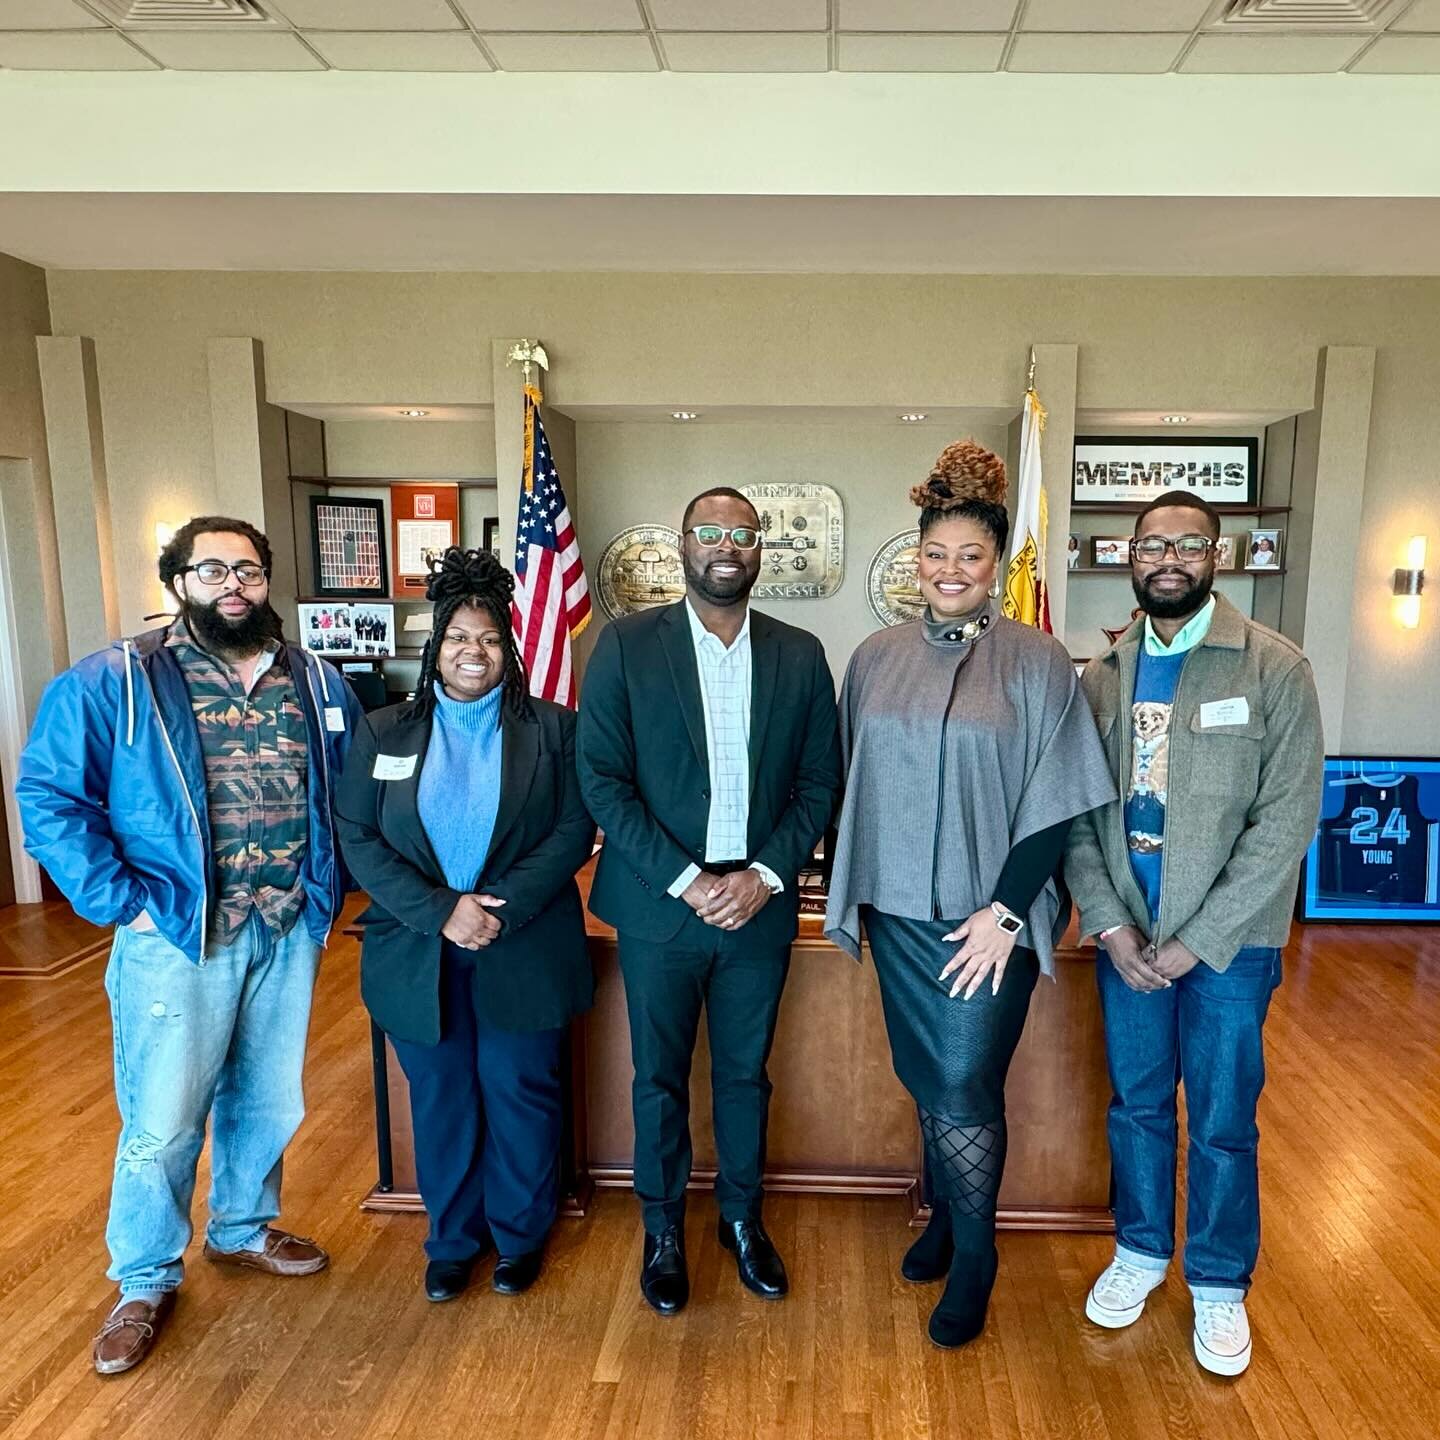 We are thrilled to share that members of the UrbanArt Commission (UAC) recently had the honor of meeting with Mayor Young. Our meeting was filled with inspiring conversations, focusing on the vibrant diversity of Memphis and the unique offerings of e